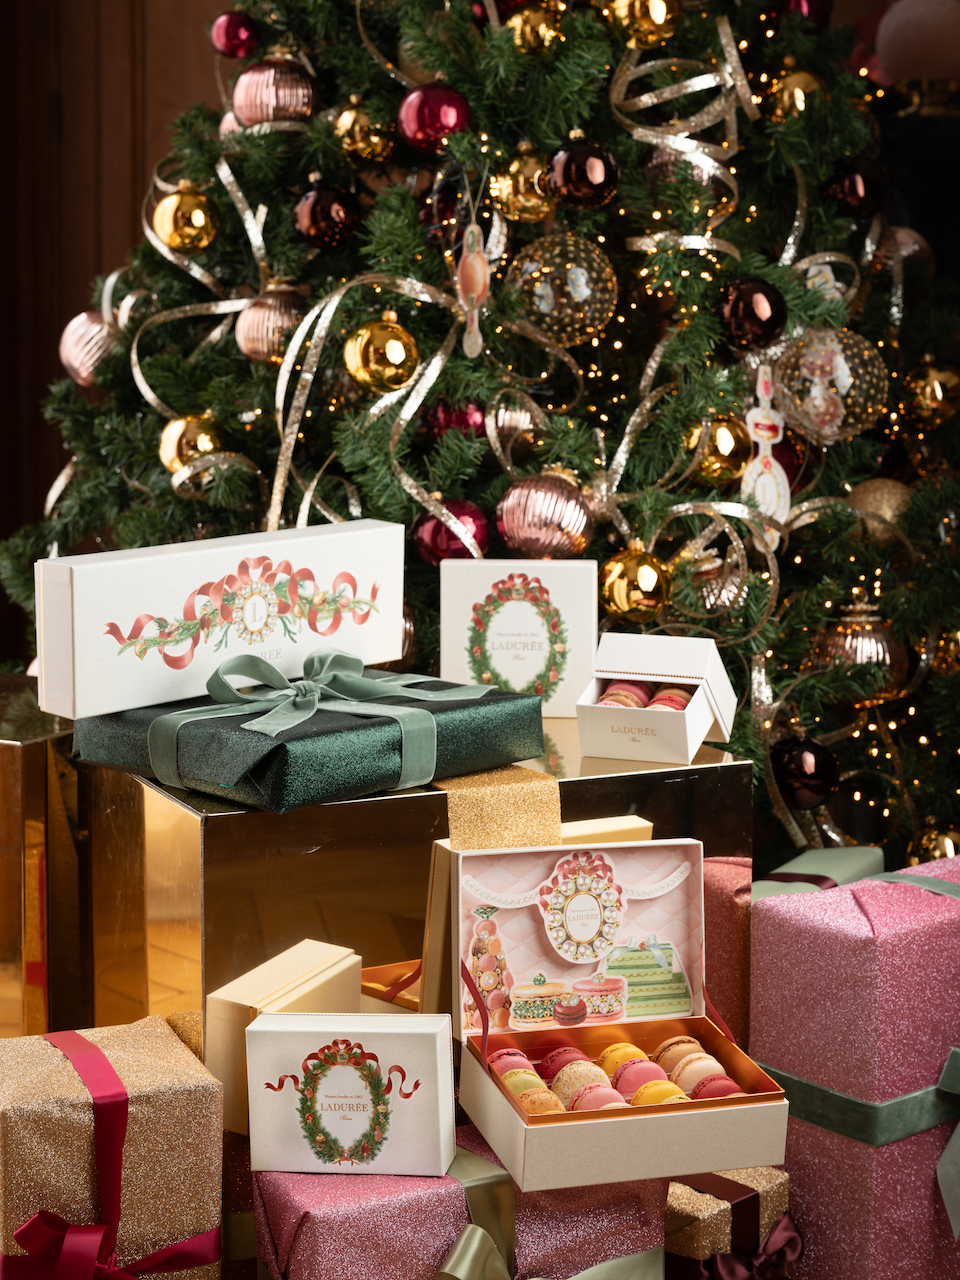 SPHERE's Christmas Gift Guide Part Two - Ladurée